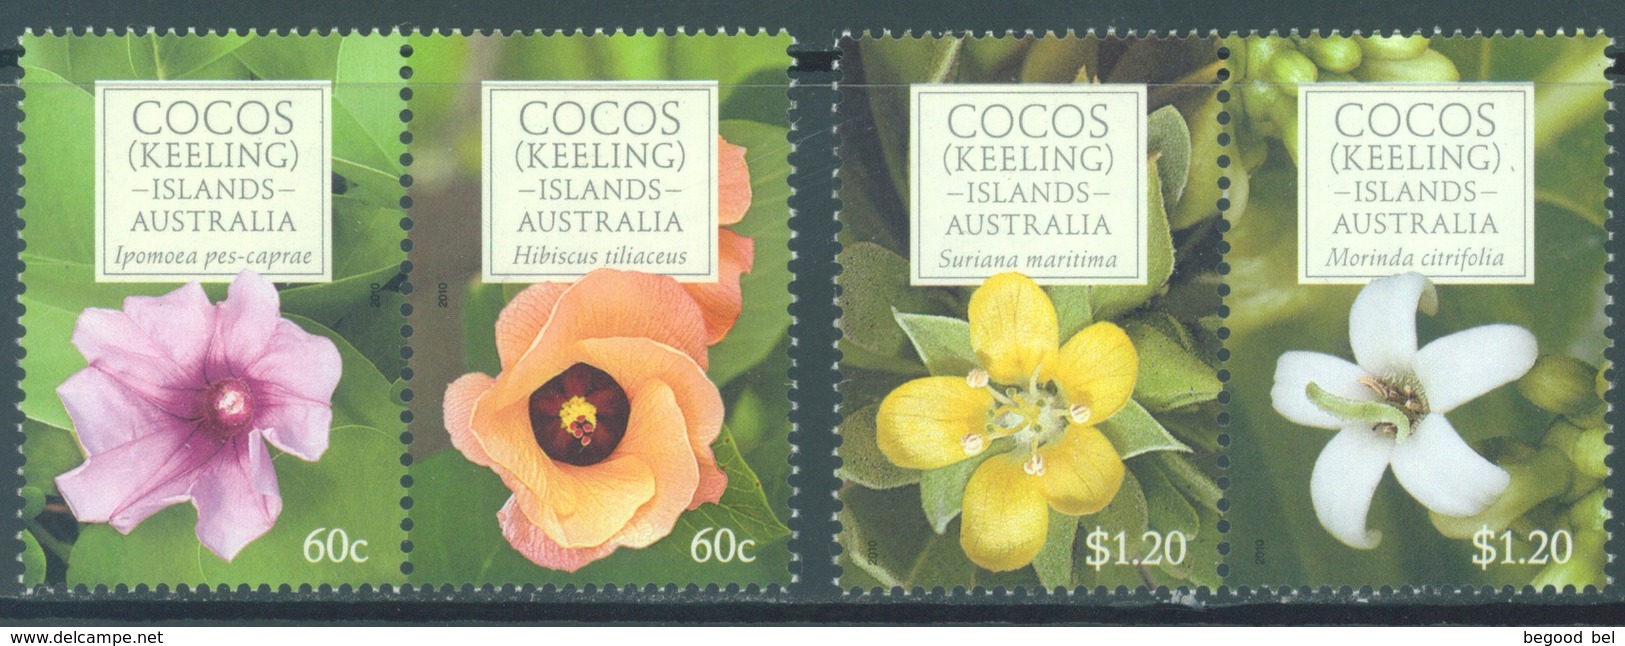 COCOS - MNH/*** LUXE  - 2010 - FLOWERS - Yv 437-440 - Lot 18697 - Cocos (Keeling) Islands